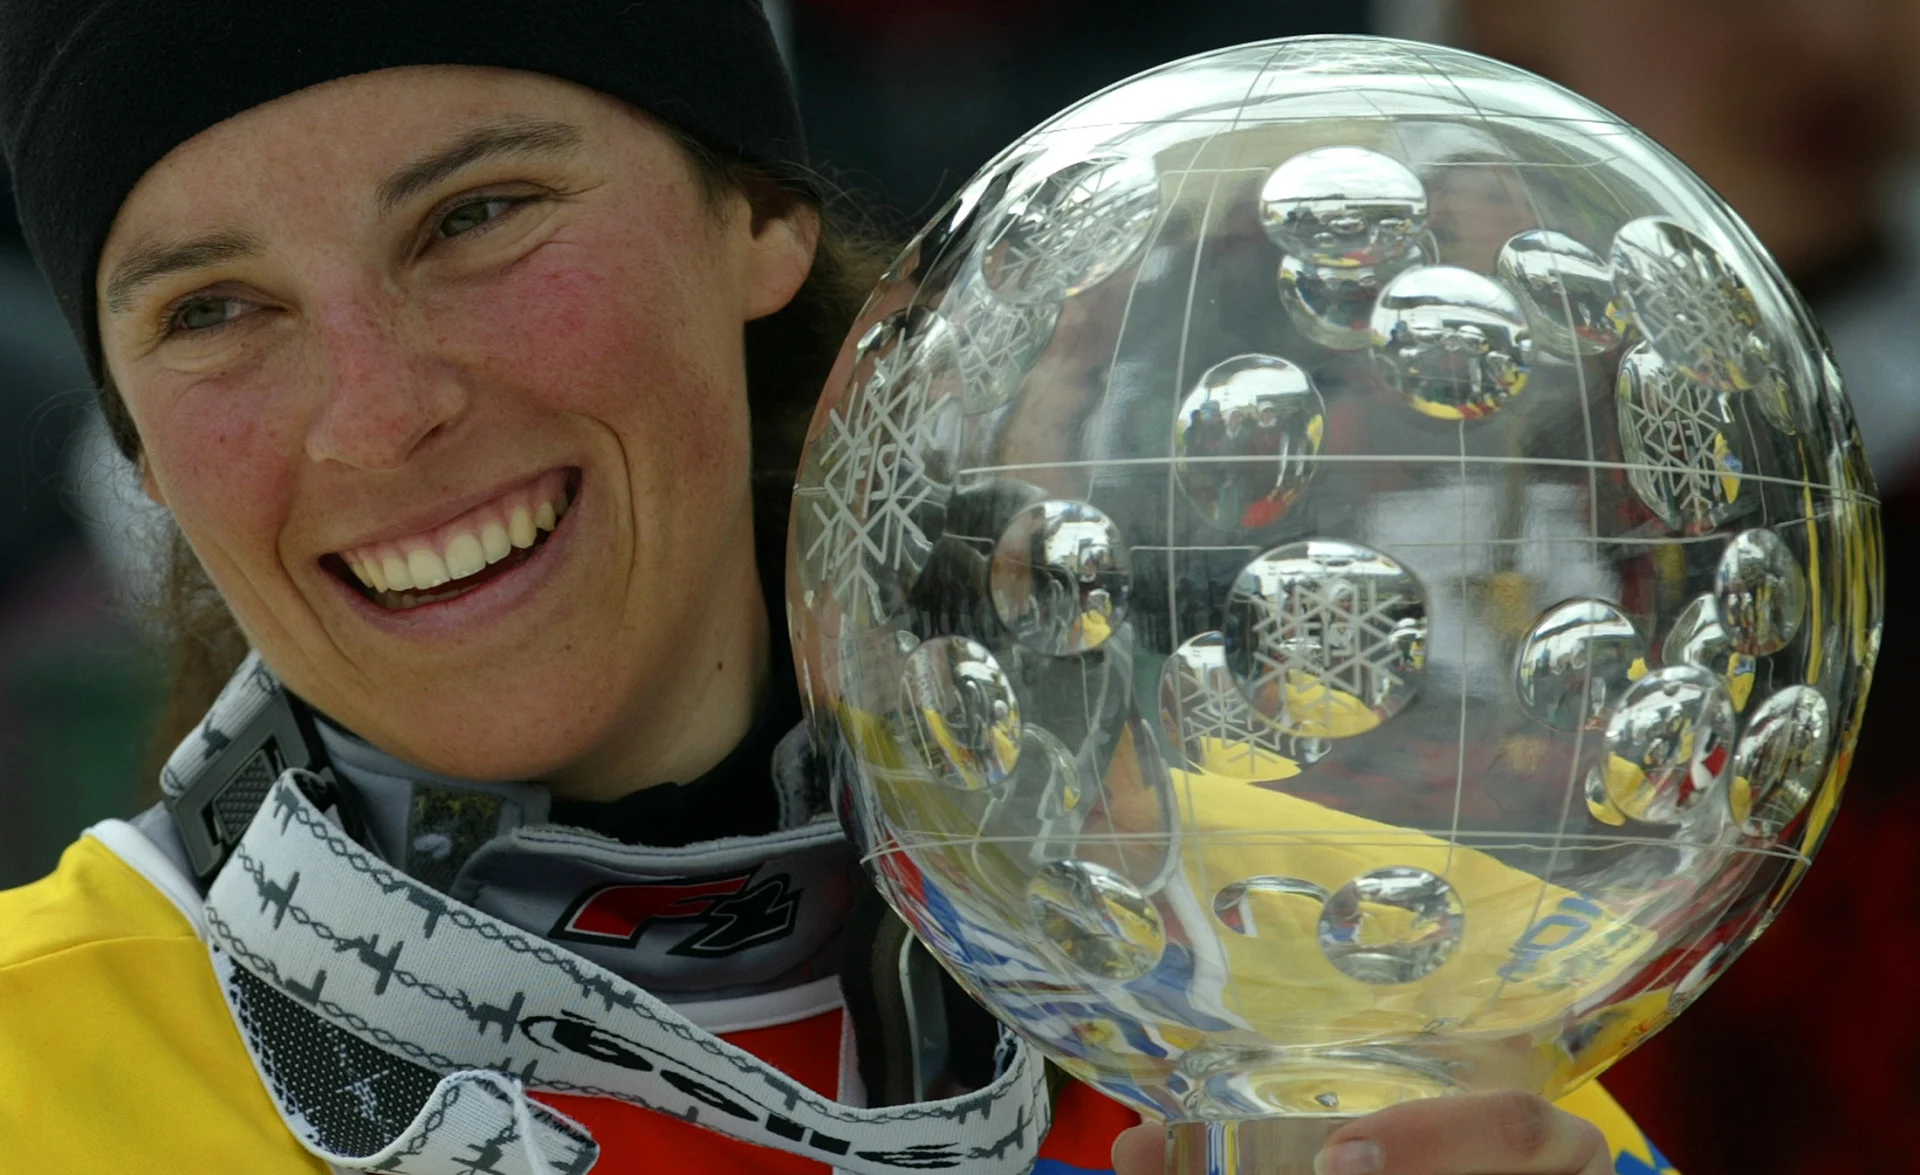 Two-time Olympic snowboarder Julie Pomagalski dies in avalanche - The ...